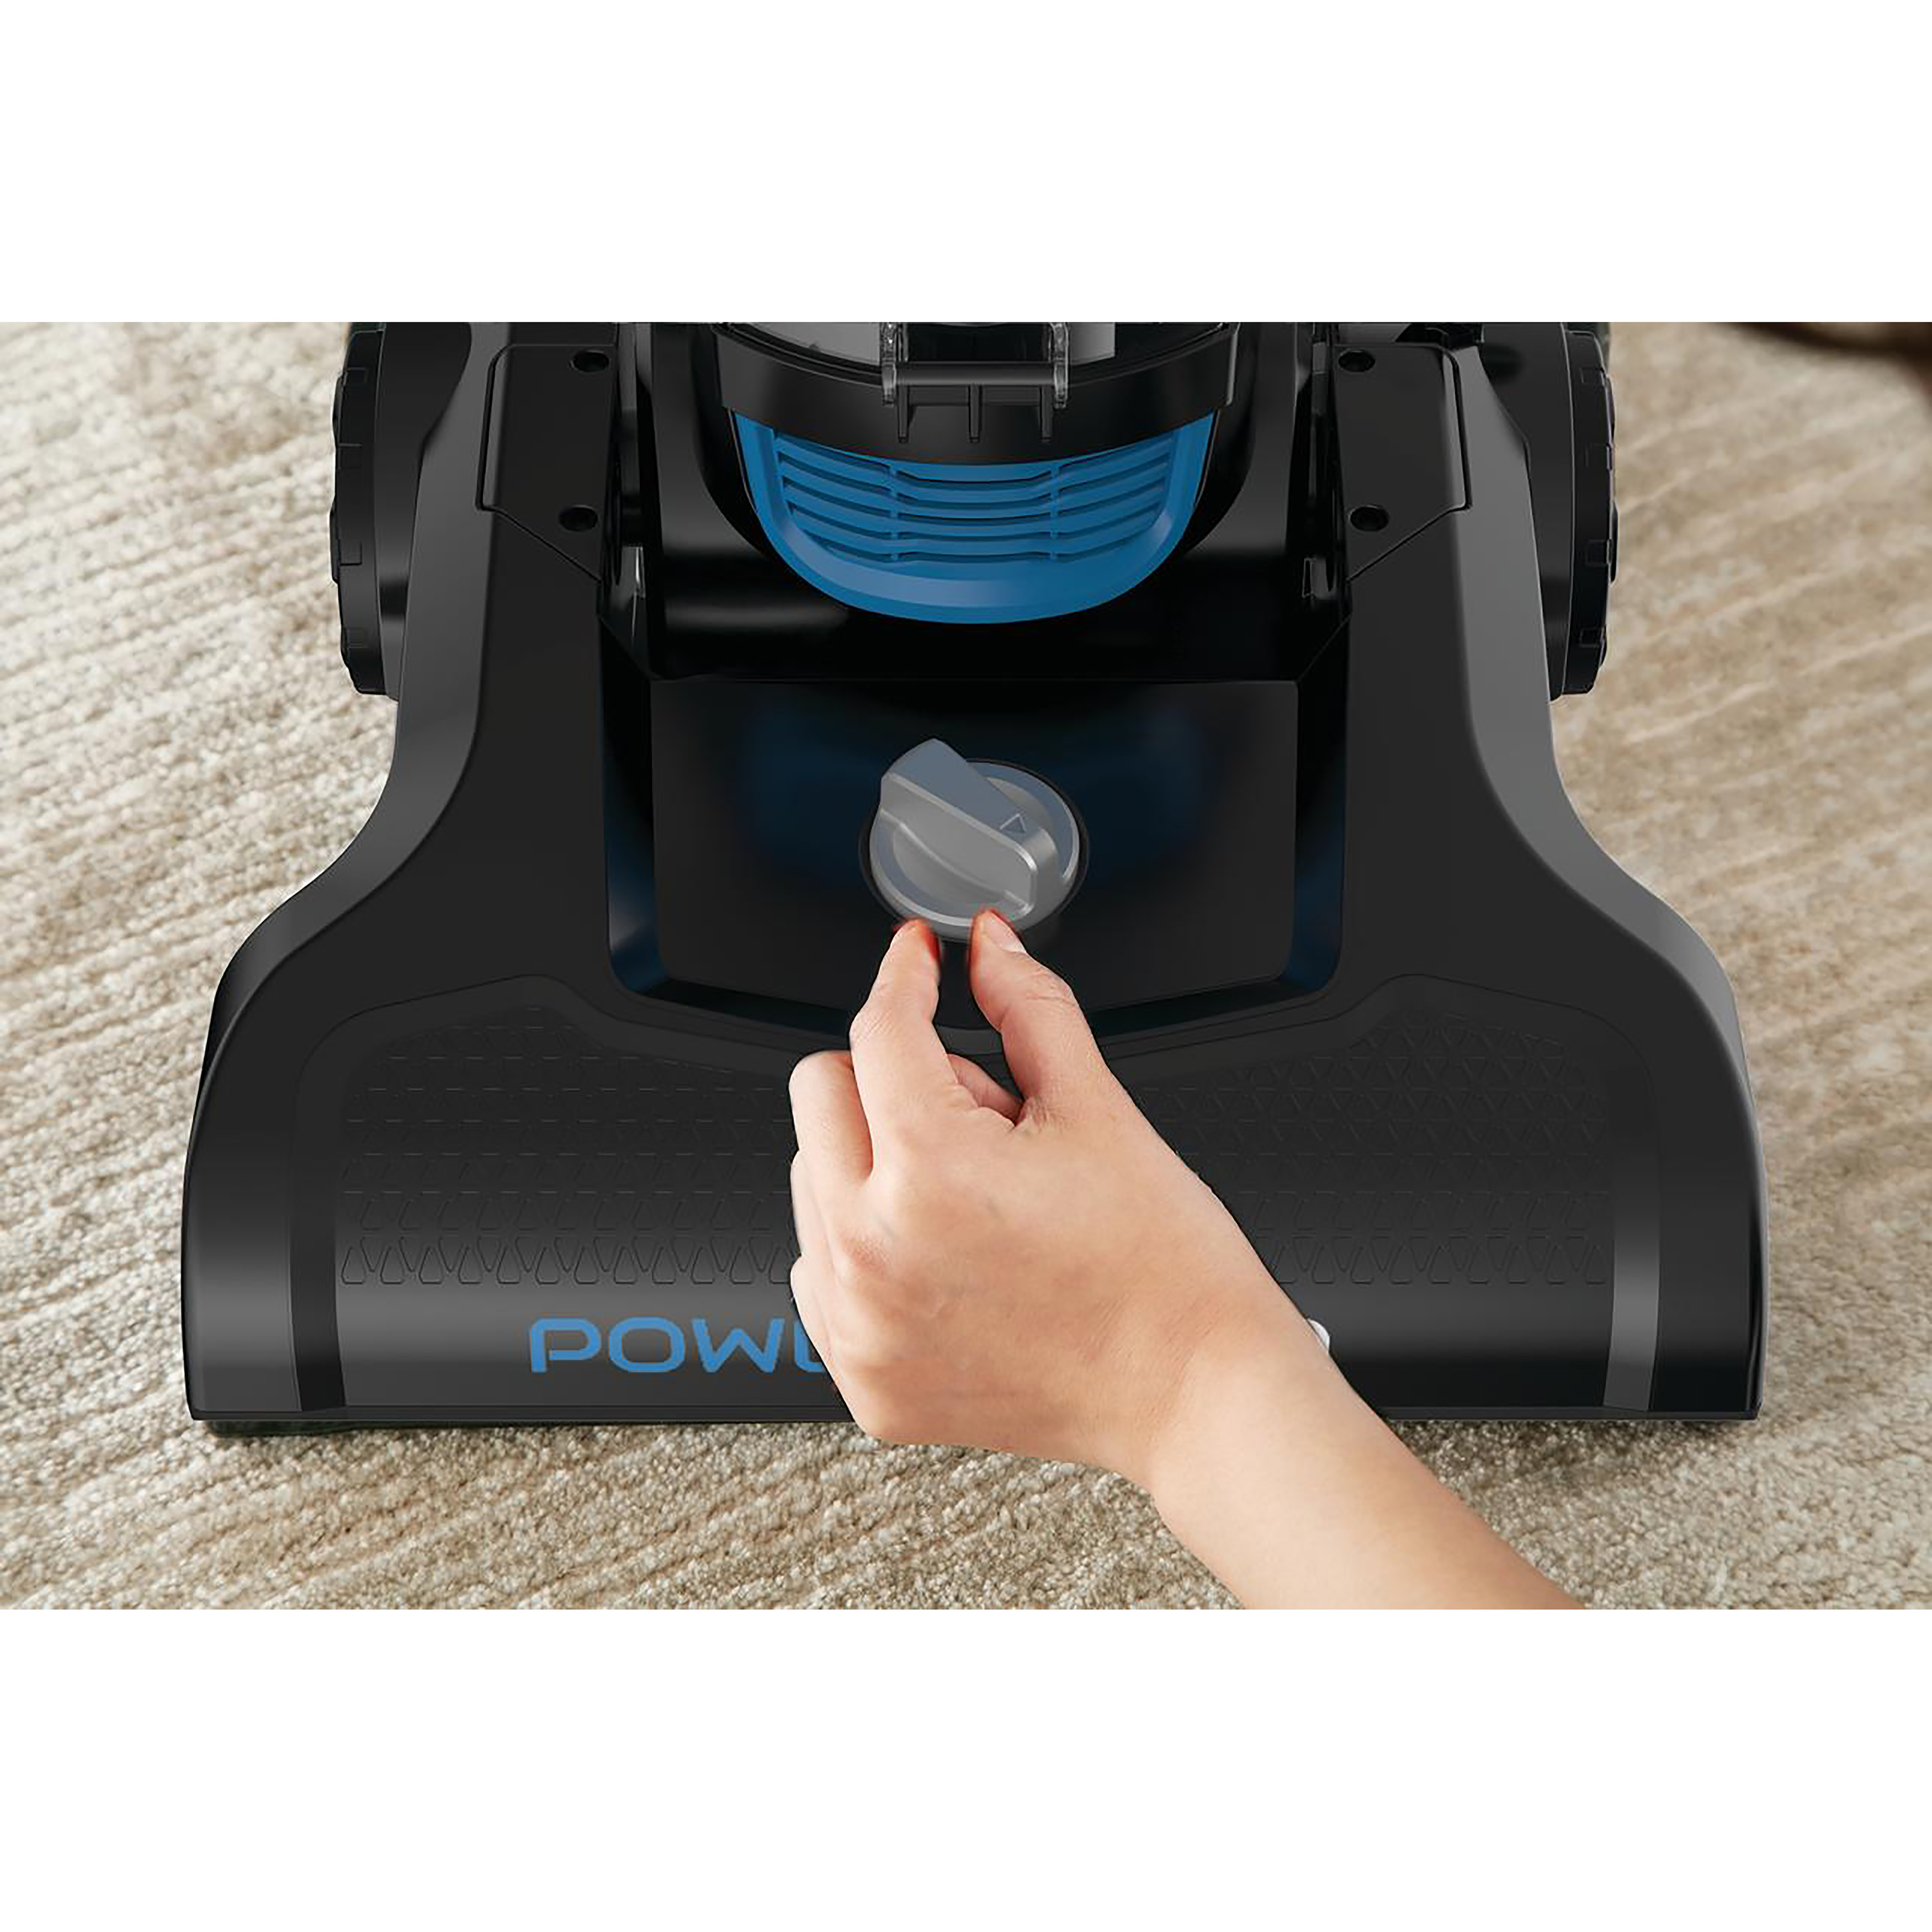 Eureka PowerSpeed Multi-Surface Upright Vacuum Cleaner with 5-Height Adjustments & XL Dust Cup, NEU185 - image 2 of 3